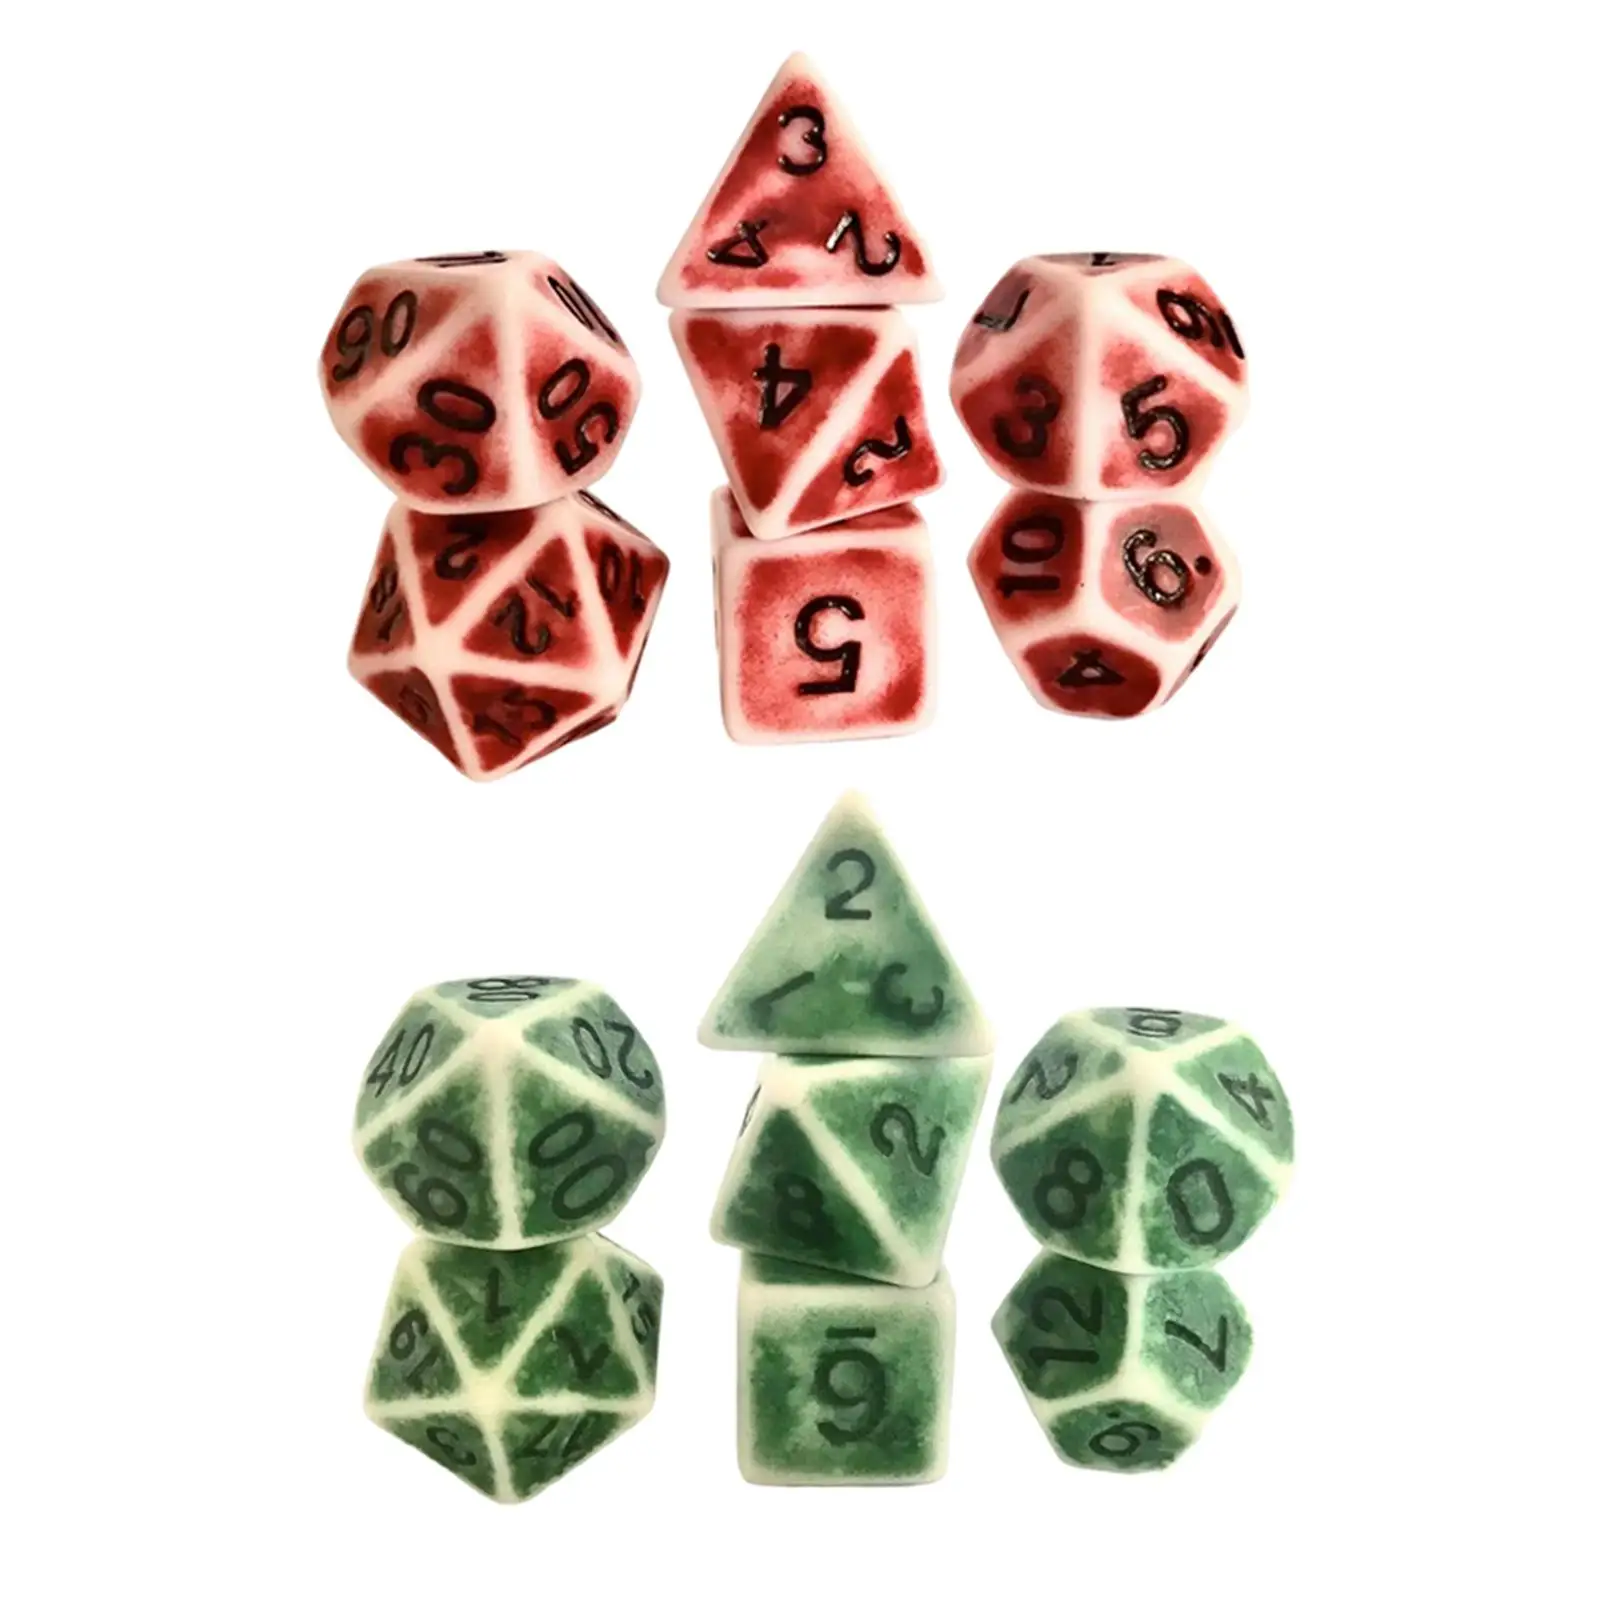 Acrylic 7-Die Polyhedral Dice Party Favor Retro Color Multi Sided Dice for Table Games Role Playing Games D&D DND RPG MTG